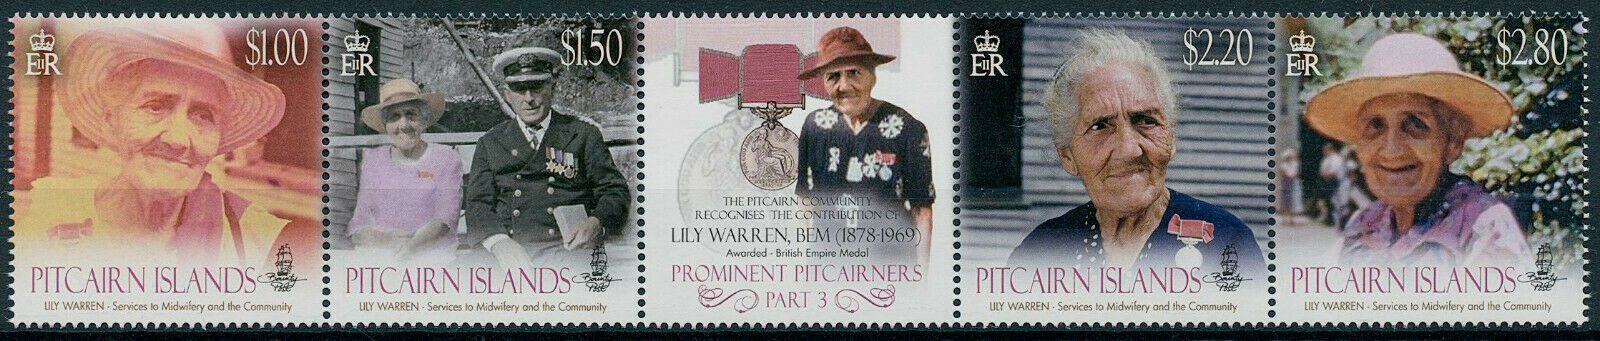 Pitcairn Islands 2013 MNH Prominent People Stamps Lily Warren Part III 4v Strip